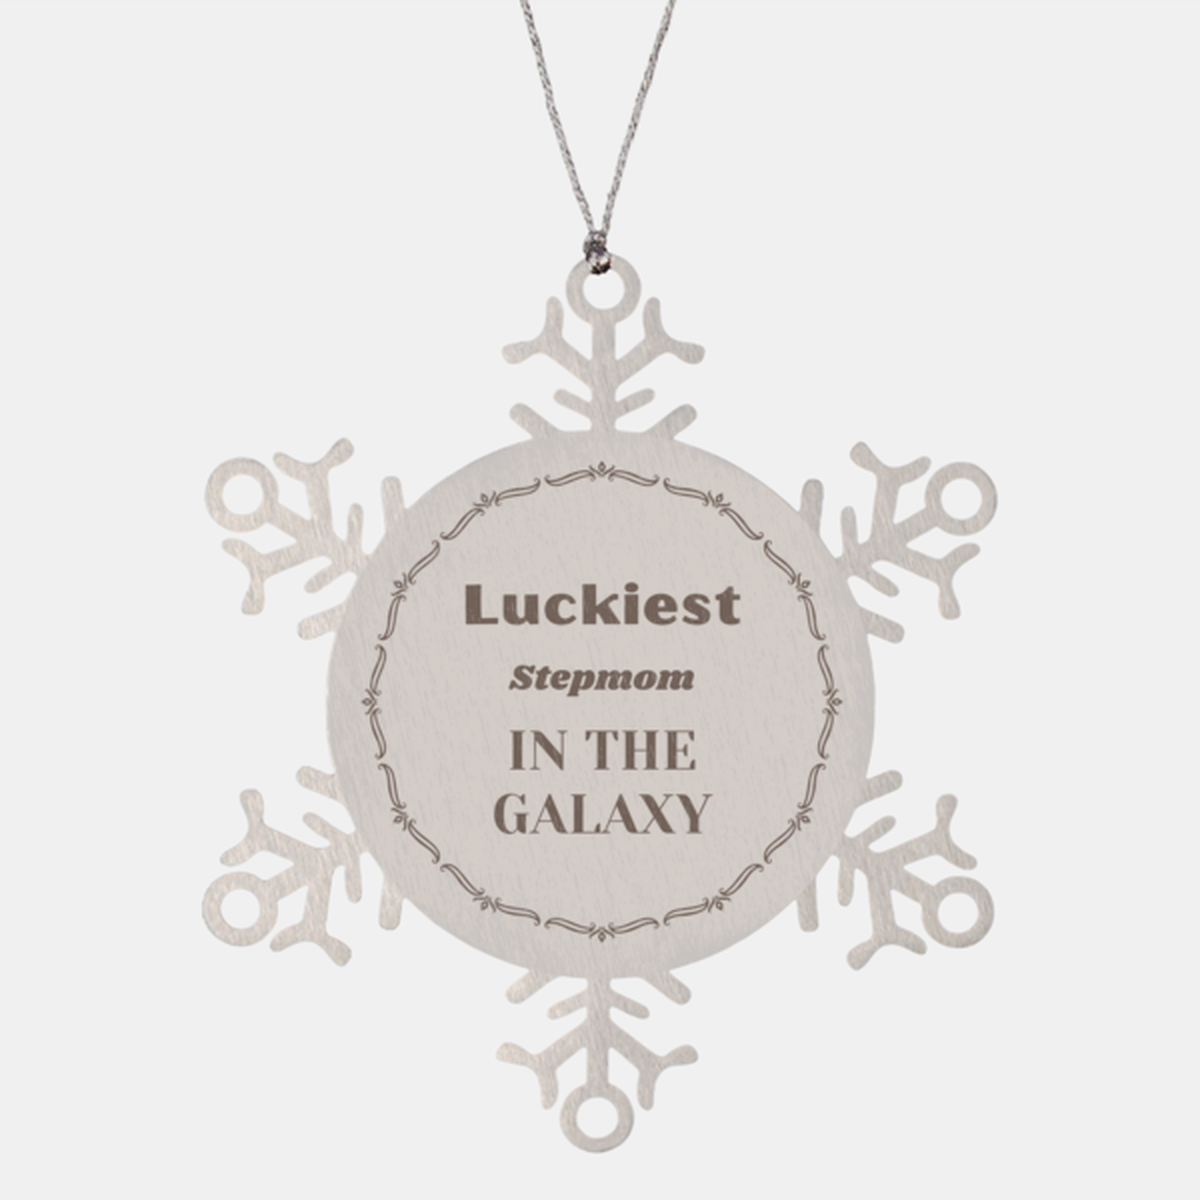 Luckiest Stepmom in the Galaxy, To My Stepmom Ornament Gifts, Christmas Stepmom Snowflake Ornament Gifts, X-mas Decorations Unique Gifts For Stepmom Men Women